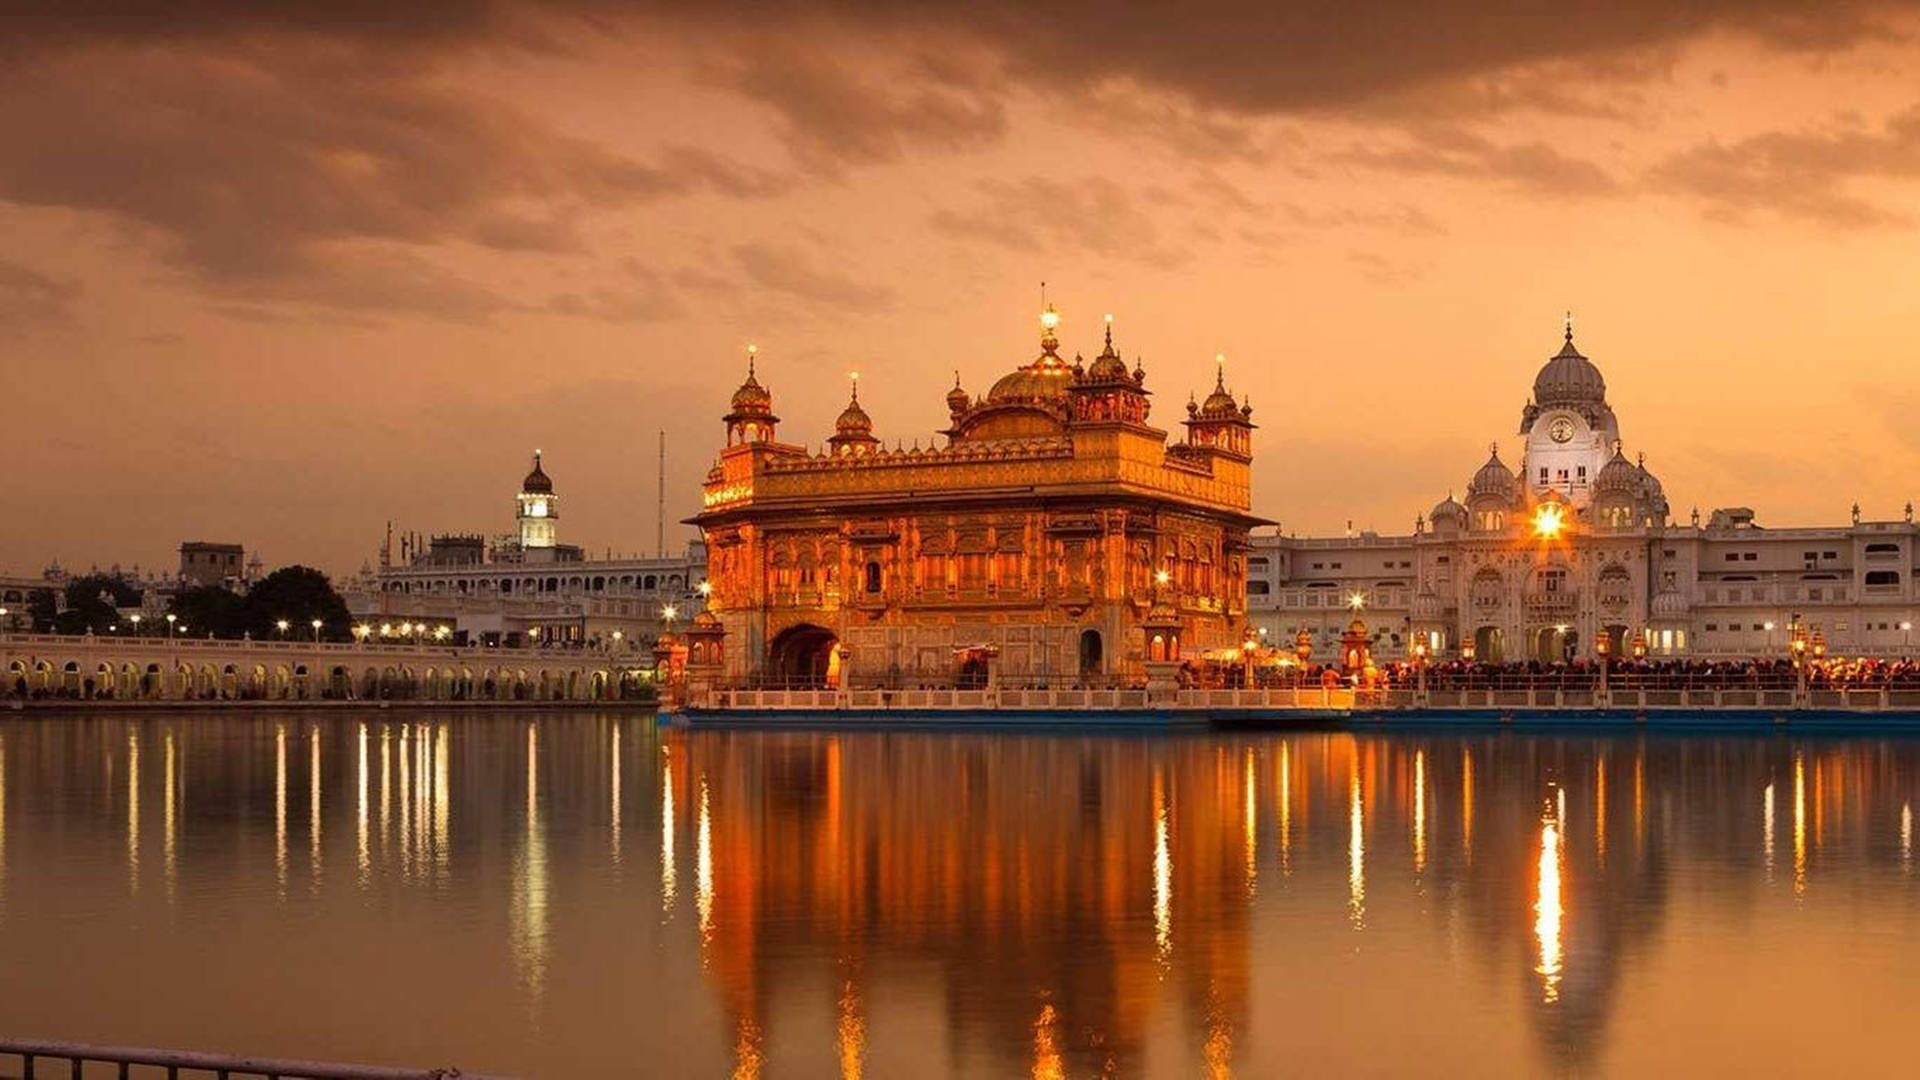 Body Of Water And Golden Temple Hd Wallpaper